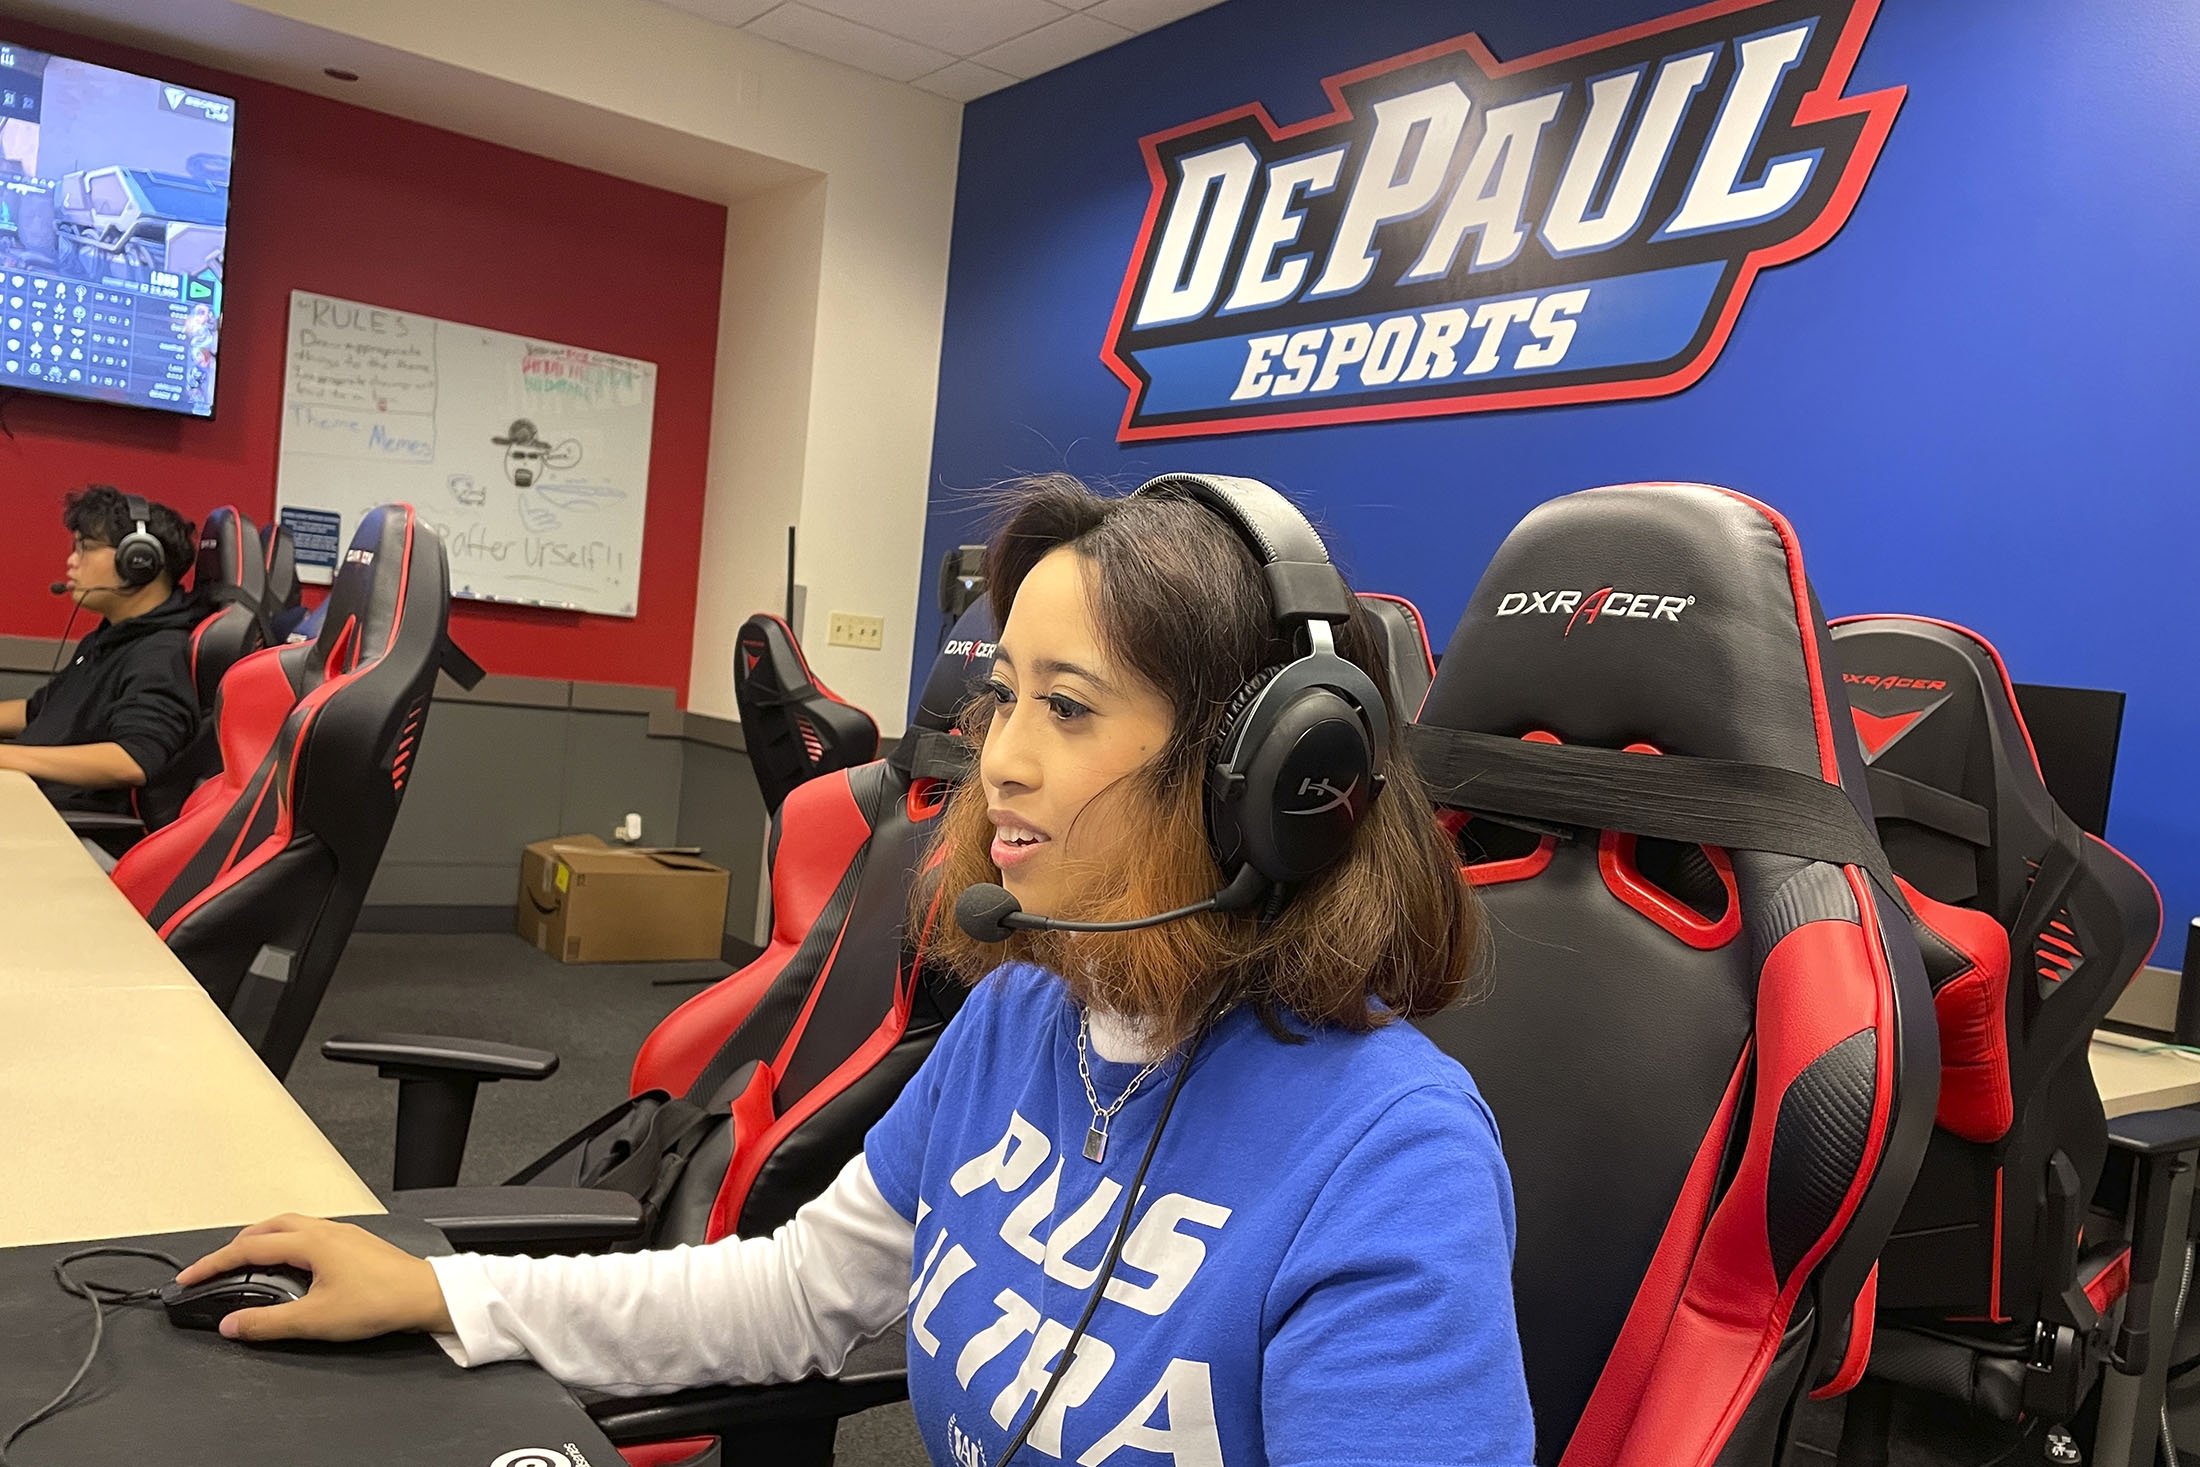 Lethrese Rosete, a 20-year-old DePaul sophomore, plays an online game at the university's Esports Gaming Center, in Chicago, U.S., Sept. 22, 2022. (AP Photo)